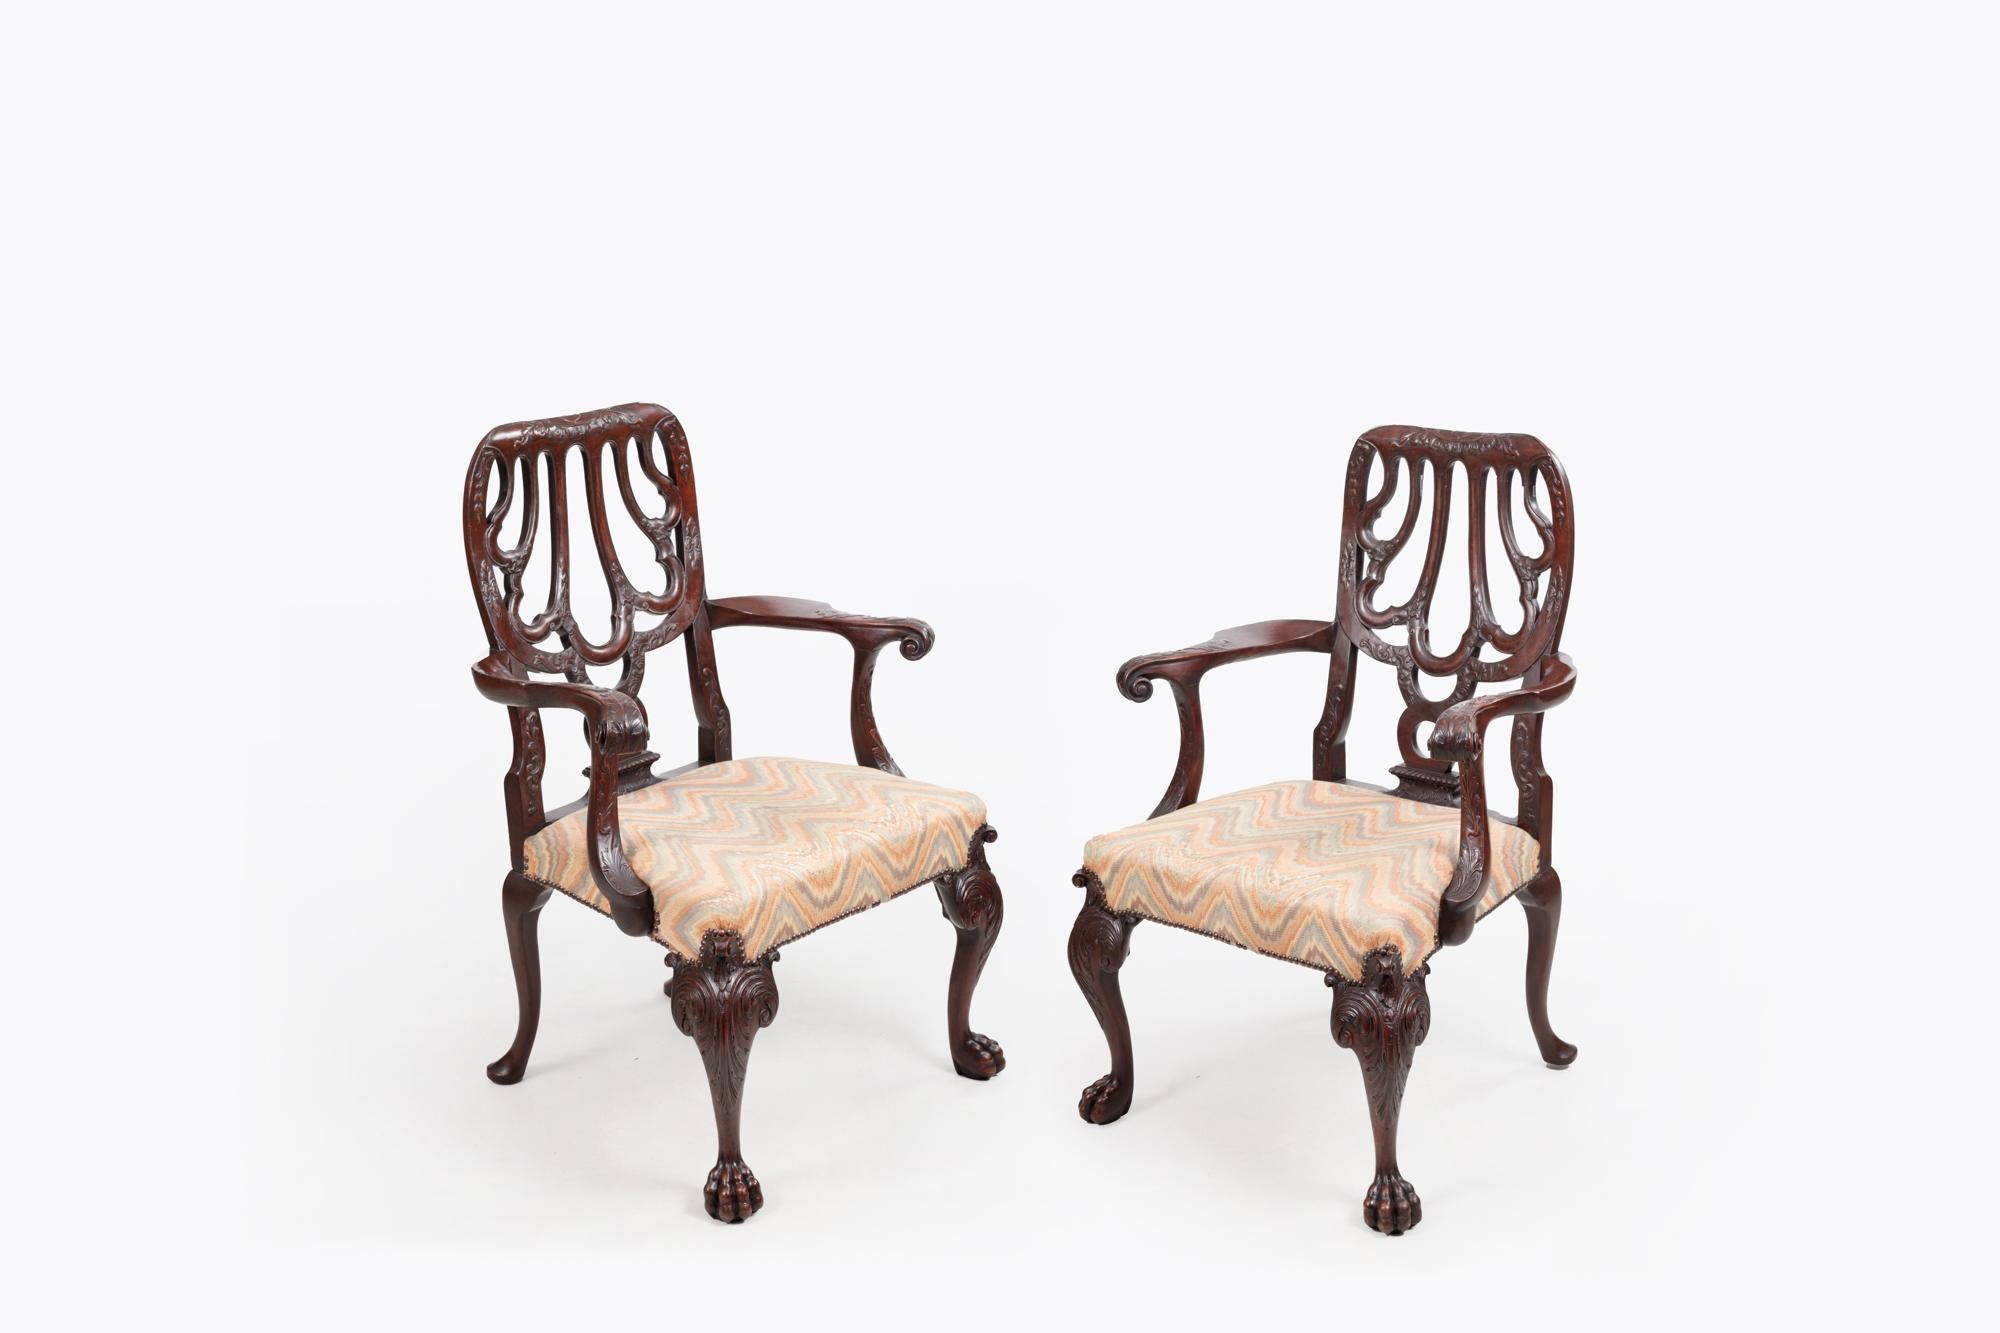 18th Century pair armchairs after Giles Grendey with pierced splat back, stylised shell motif and scrolled armrests with relief carved decoration. The upholstered seats rest above carved cabriole legs with scroll and acanthus leaf decoration